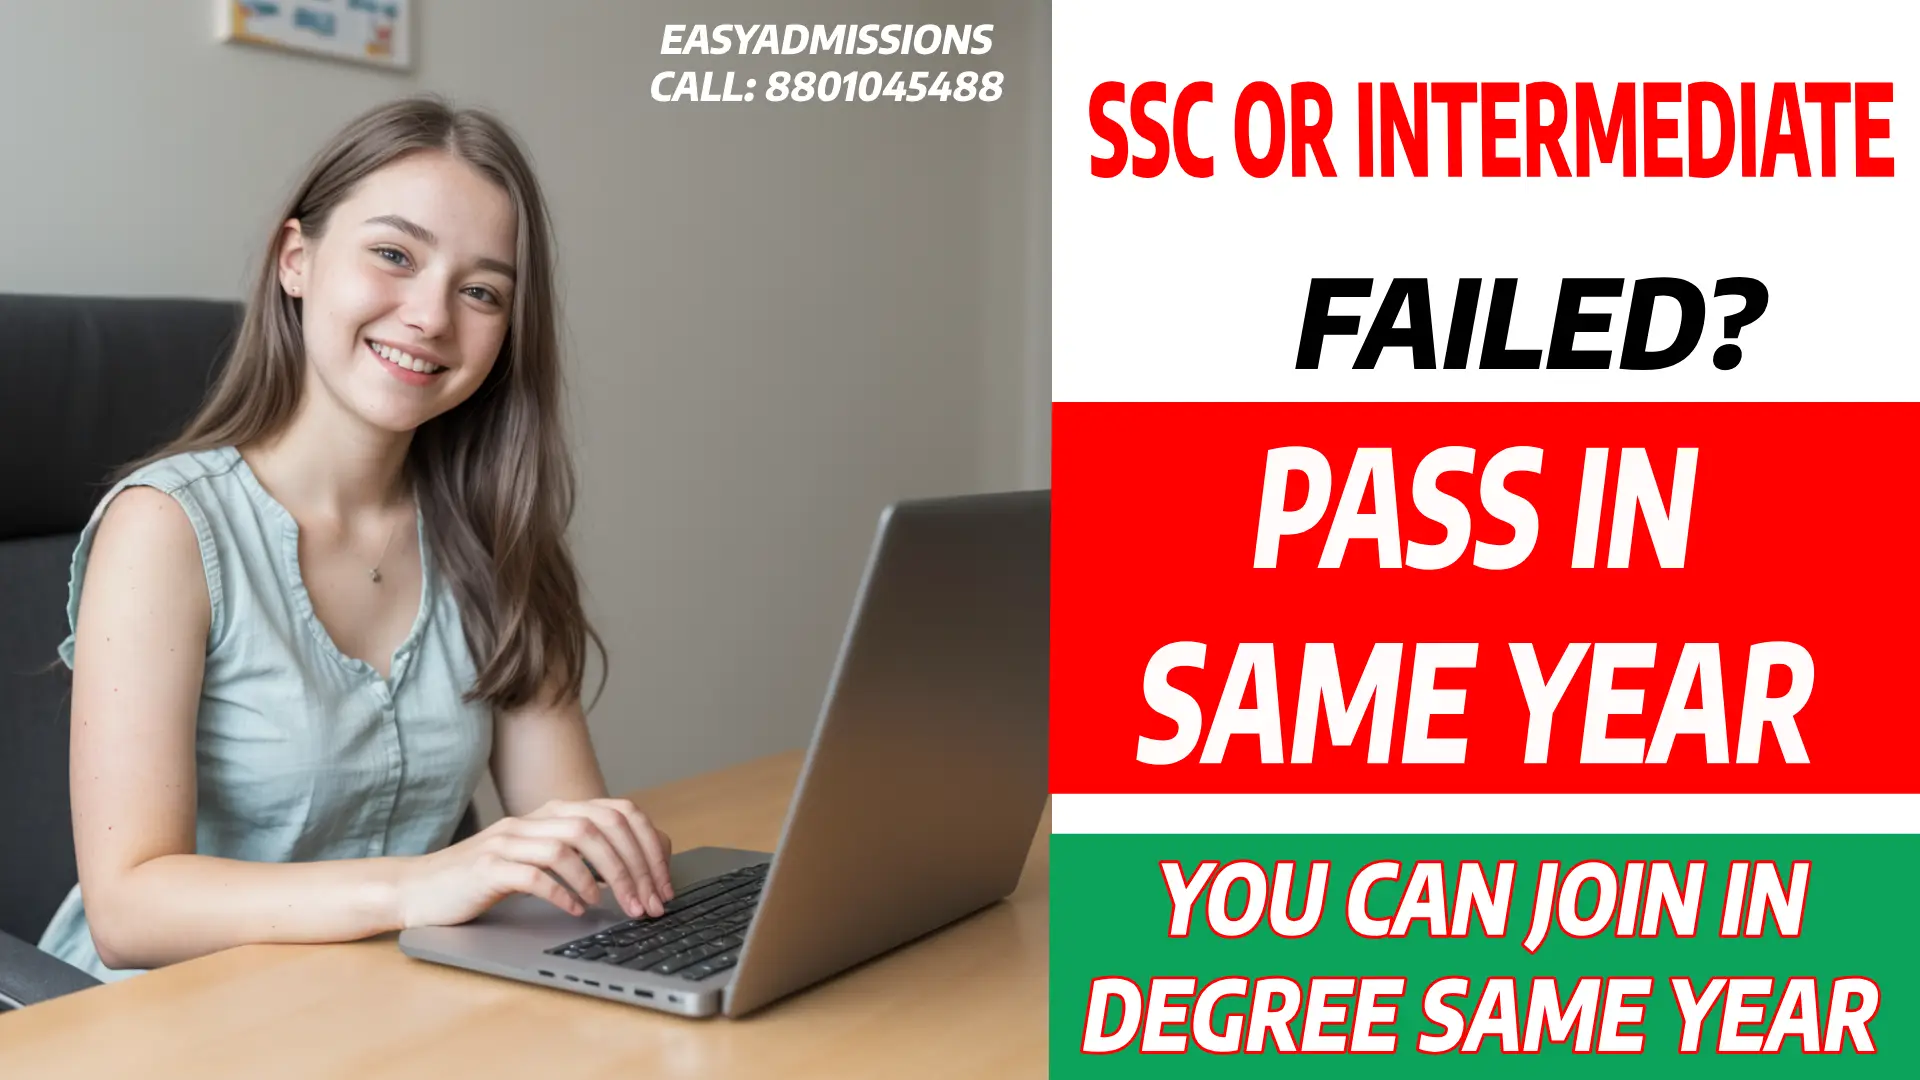 NIOS On-Demand Exam in Hyderabad for SSC or Inter Failed Students